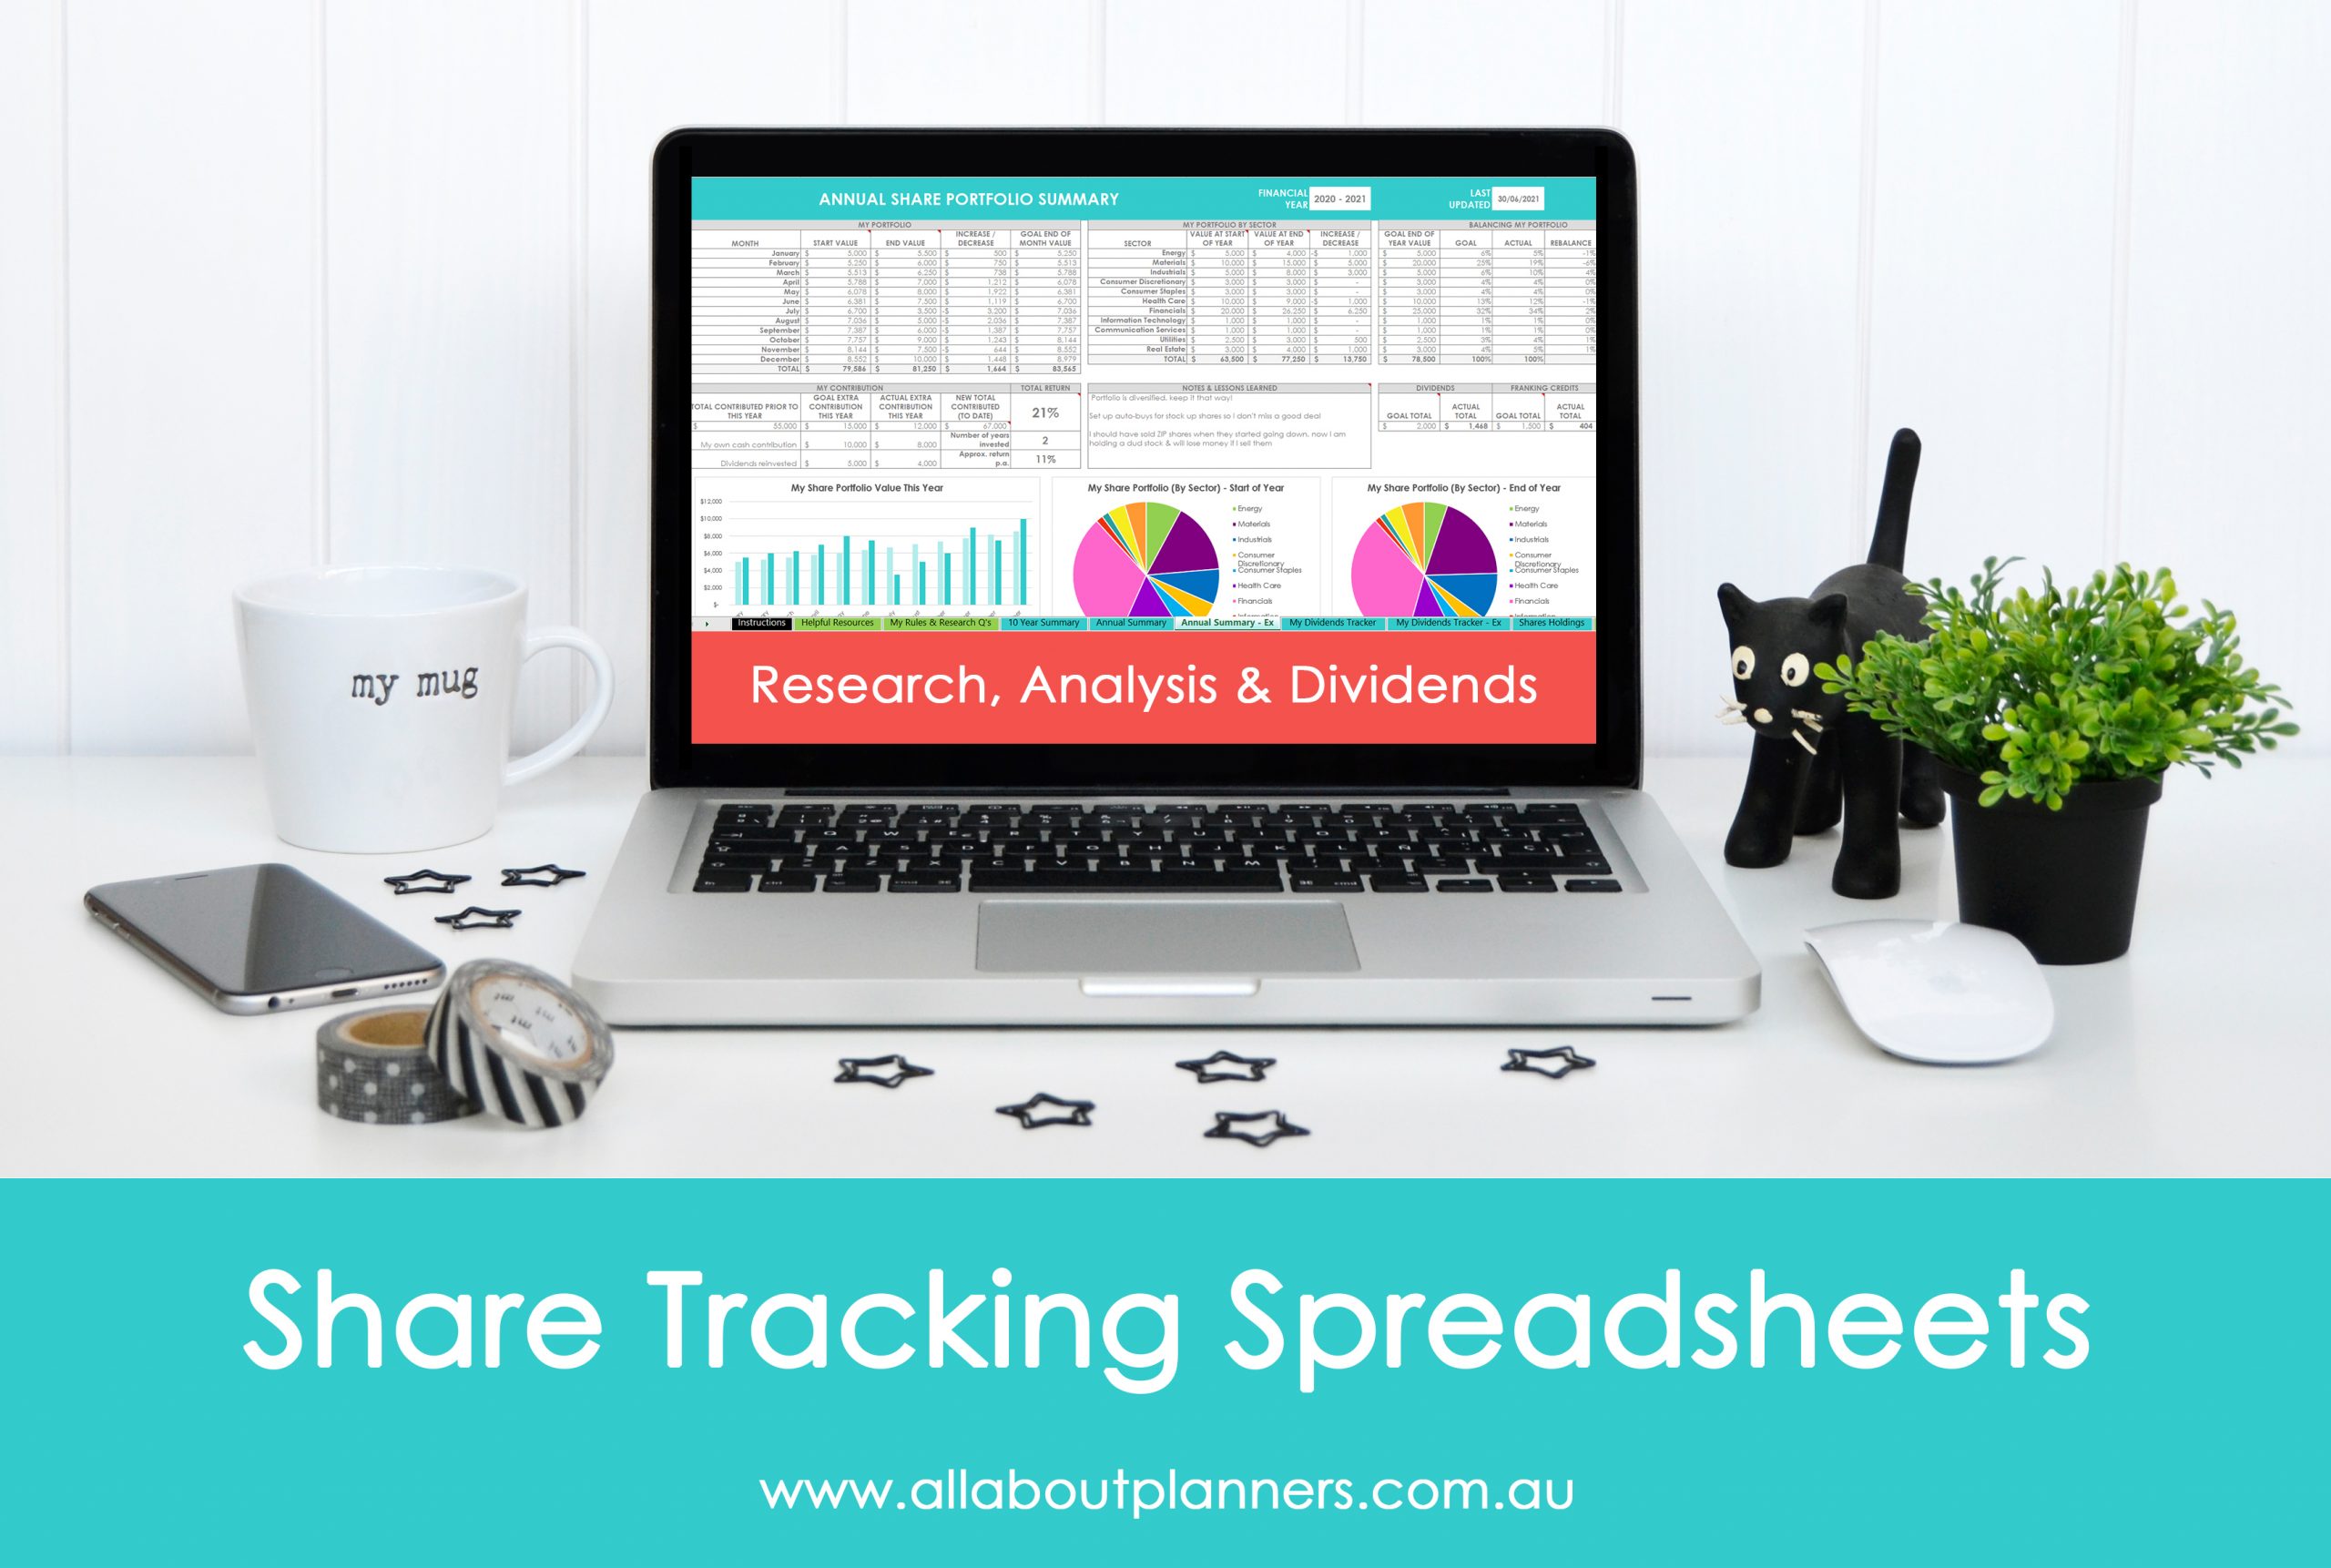 share portfolio tracking spreadsheets excel google sheets numbers for mac stocks australia usa tax time dividends tracker yield tools research analysis annual summary tax franking credits